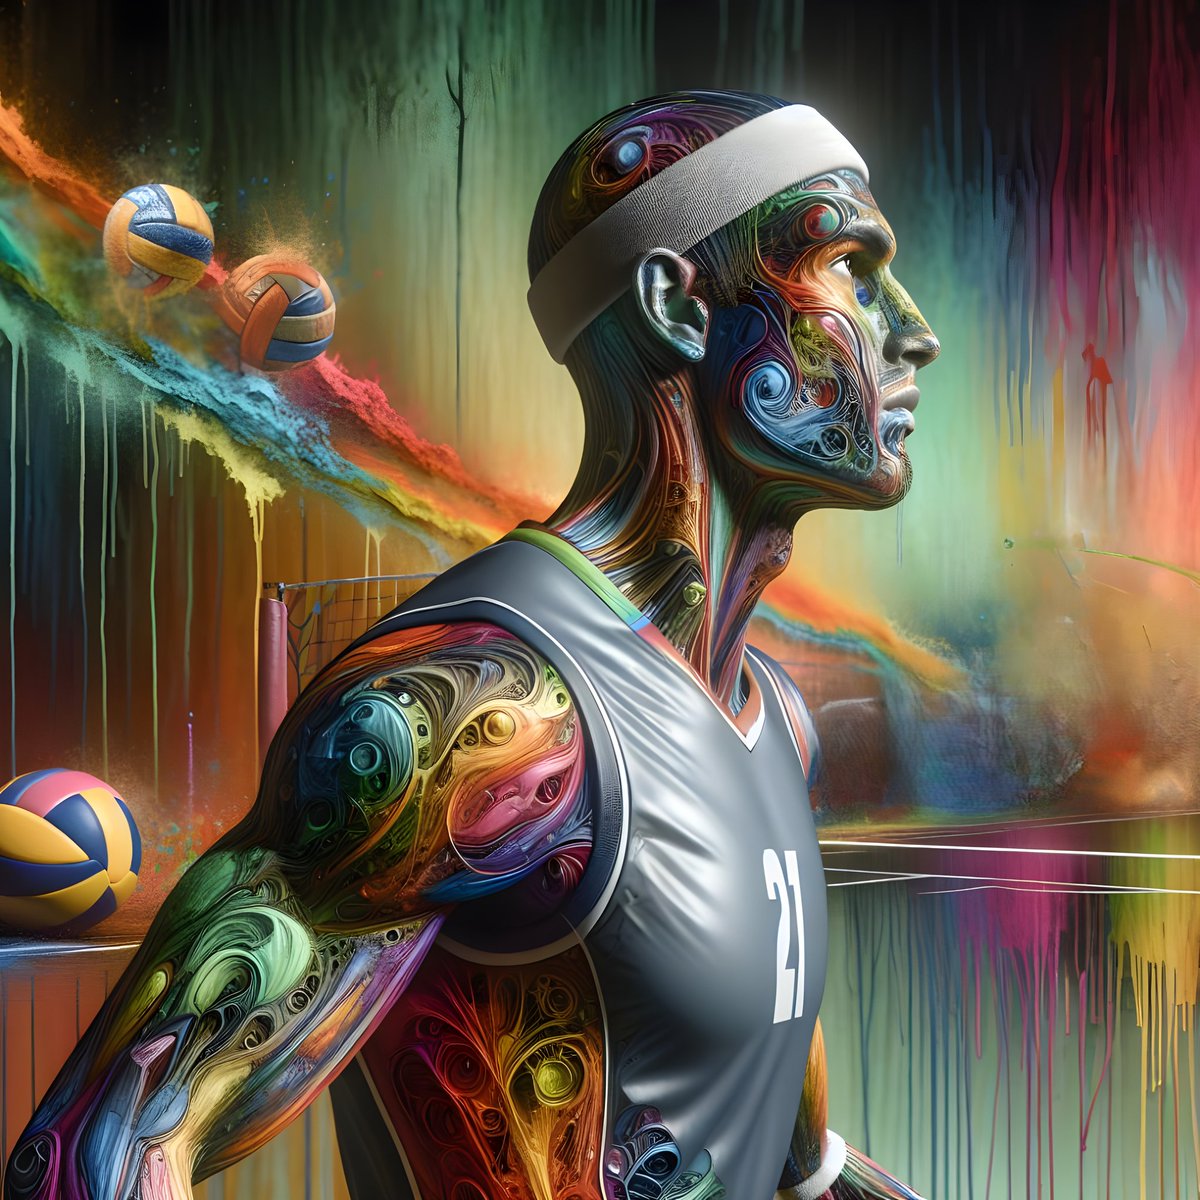 These are unique digital artworks that capture the essence of sport in a way never seen before.  

If you like it follow me!  

opensea.io/BlackSharkNFT 

#NFT #CryptoArt #DigitalArt #FantasyNFT #Rarible #Opensea #NFTCreator #NFTCollector #NFTInvestor #NFTCommunity